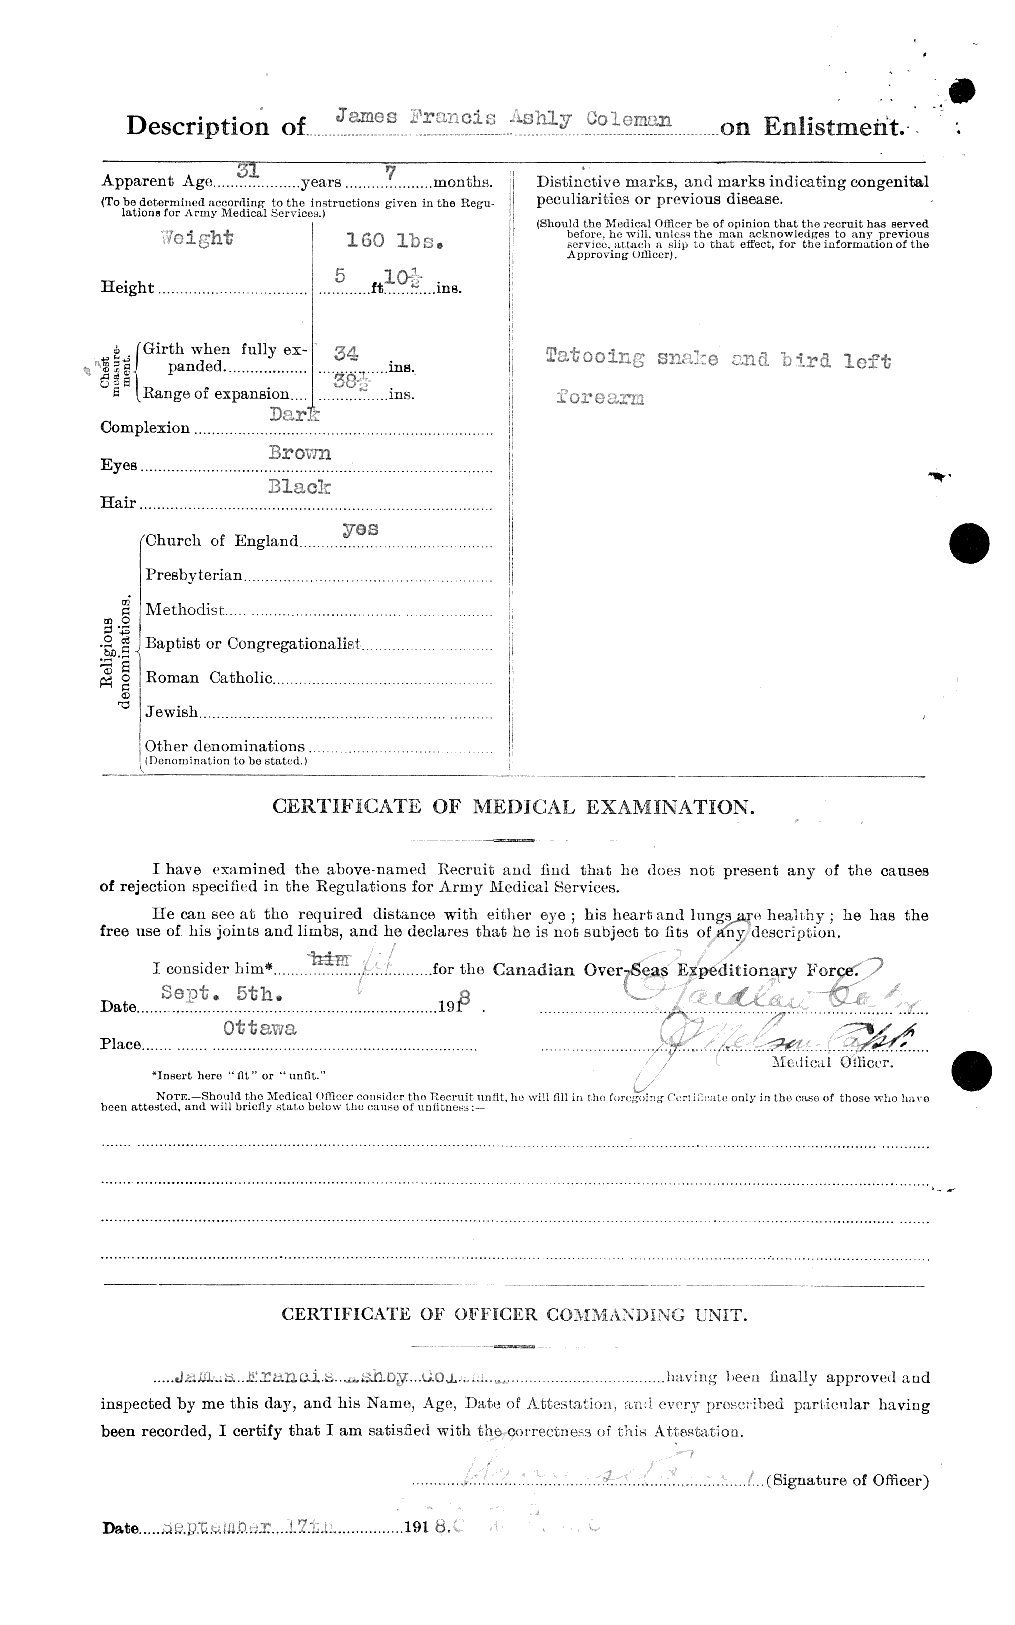 Personnel Records of the First World War - CEF 028193b